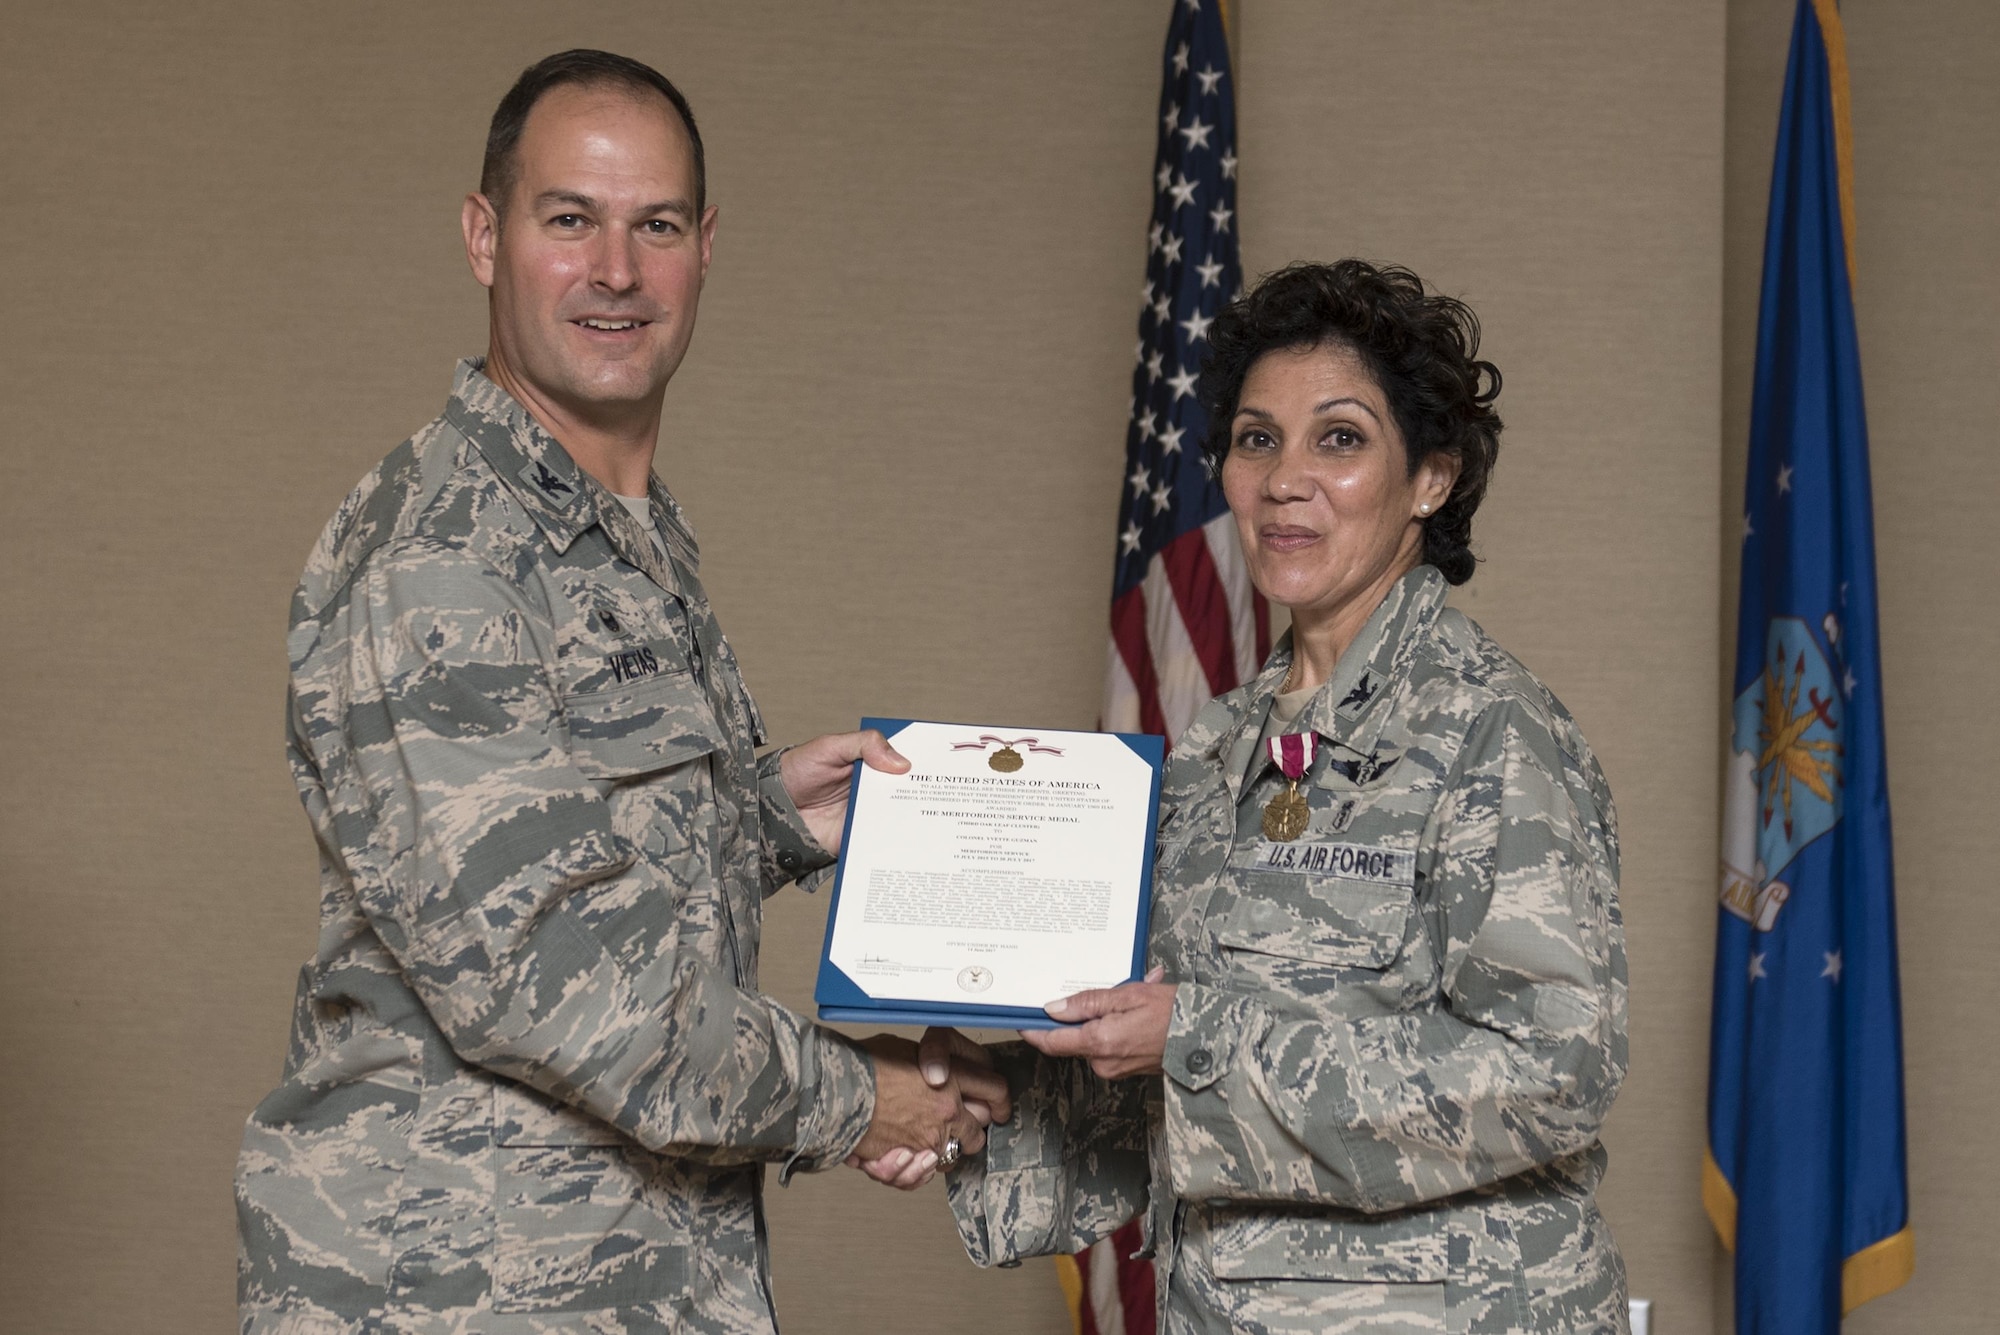 Col. Jay Vietas, 23d Medical Group commander, left, presents the Meritorious Service Medal to Col. Yvette Guzman, outgoing 23d Aerospace Medicine Squadron commander, during a change of command ceremony, July 20, 2017, at Moody Air Force Base, Ga. The change of command ceremony is a part of military history signifying the hand-off of responsibility of a unit from one commander to another. (U.S. Air Force photo by Airman 1st Class Destiney Masse)